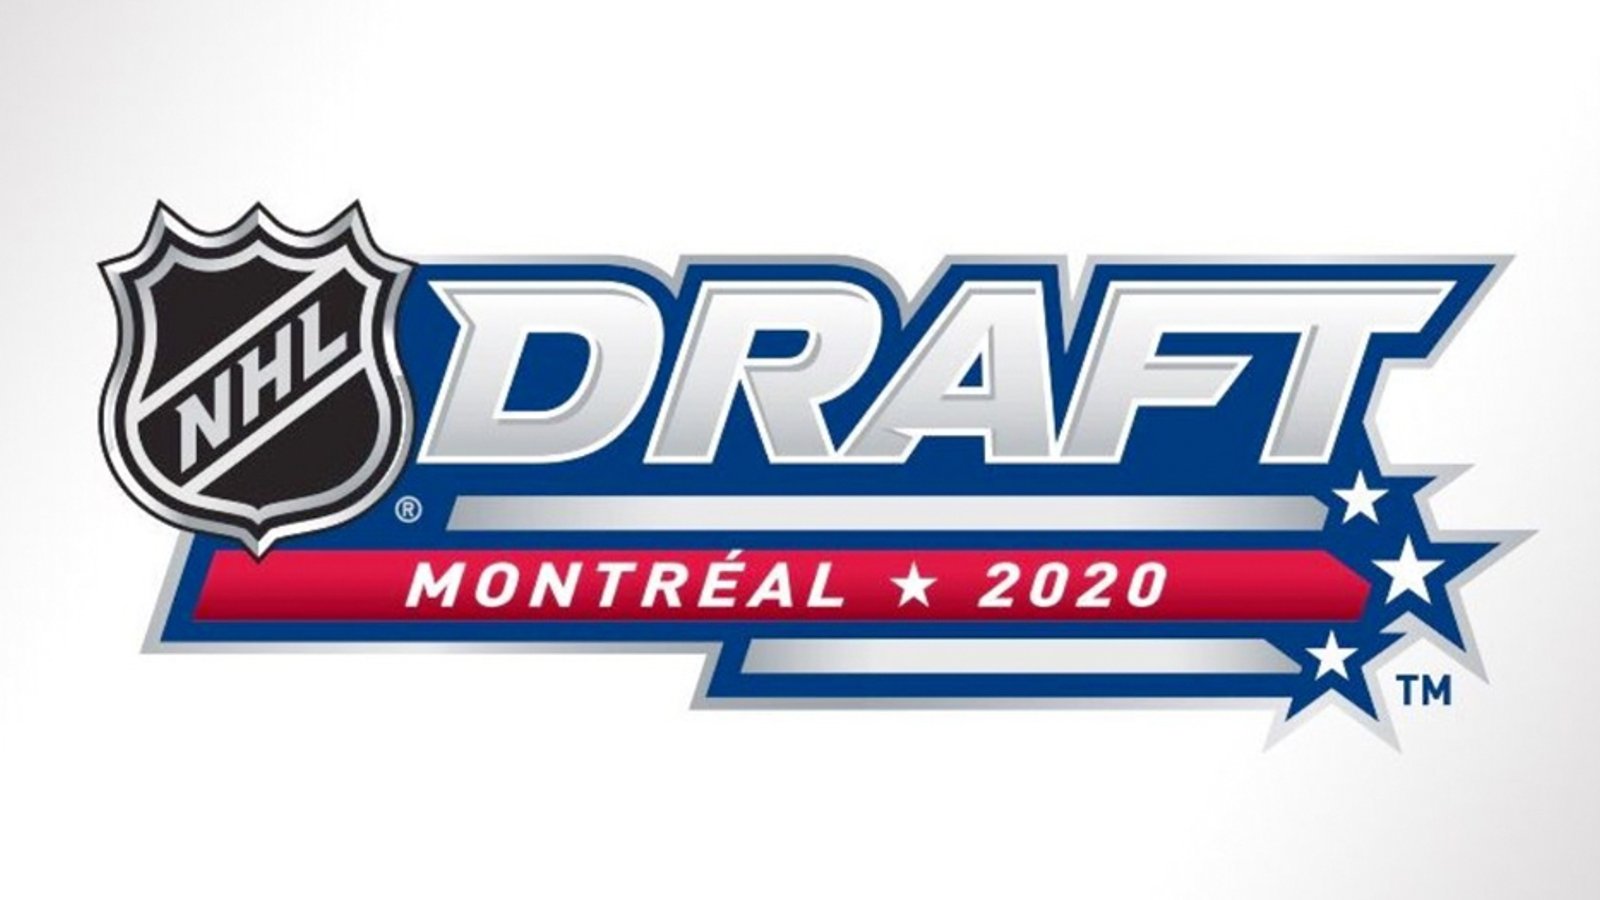 NHL sets dates for Draft and free agency period